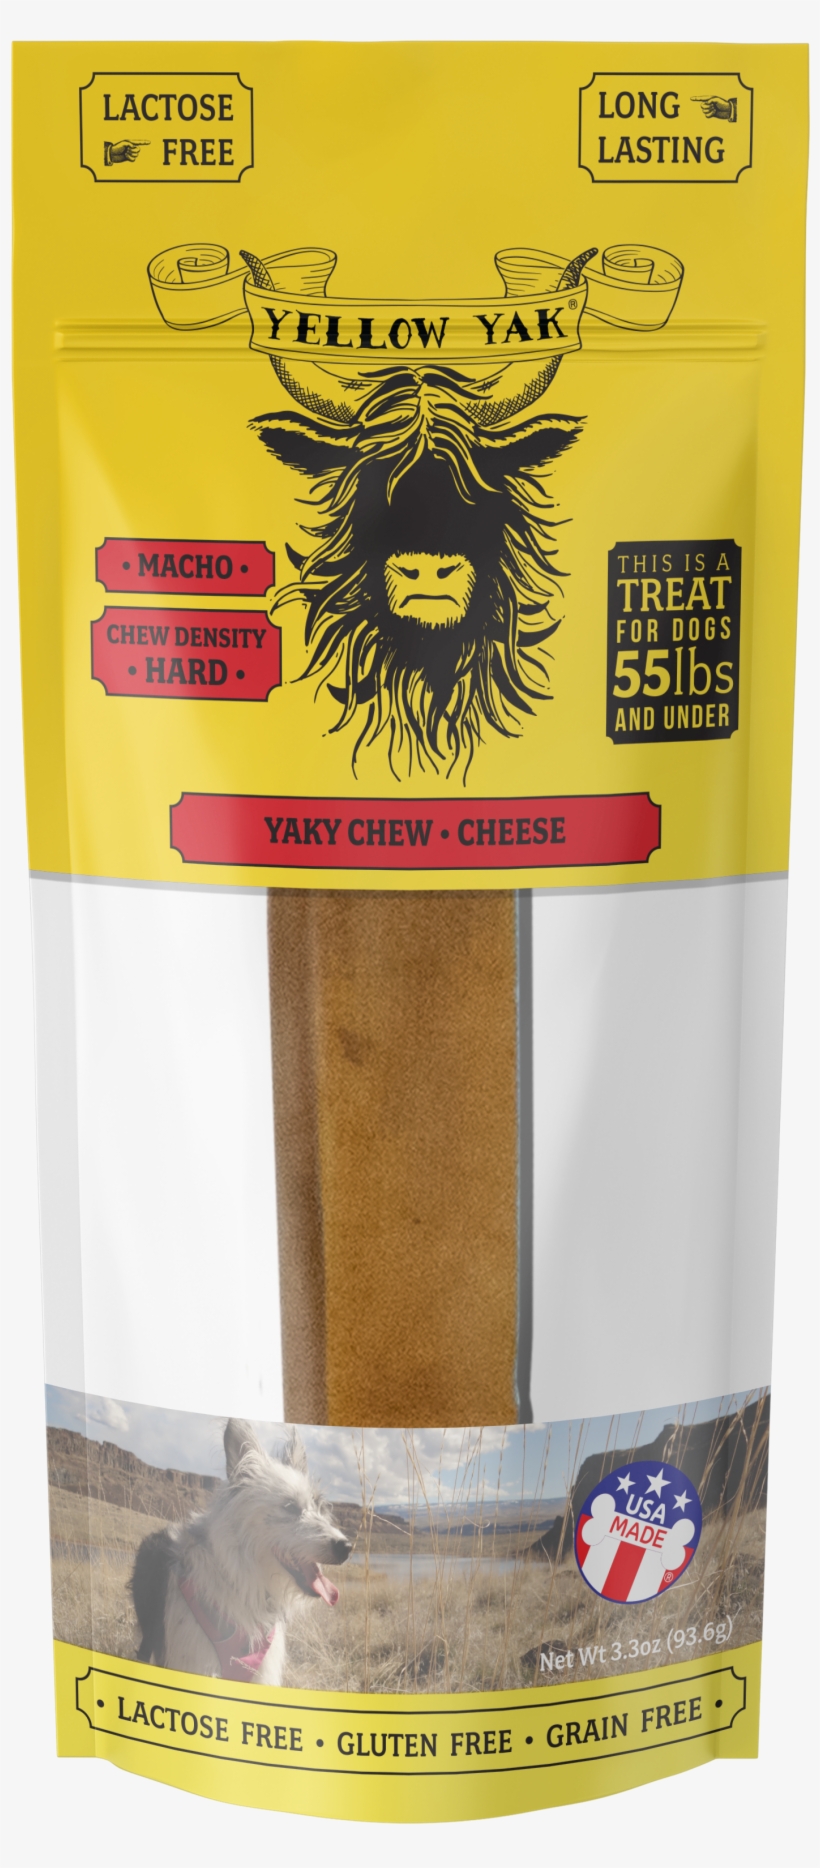 Hard Macho Yaky Chew Cheese Treat For Dogs - Puppy, transparent png #7958467